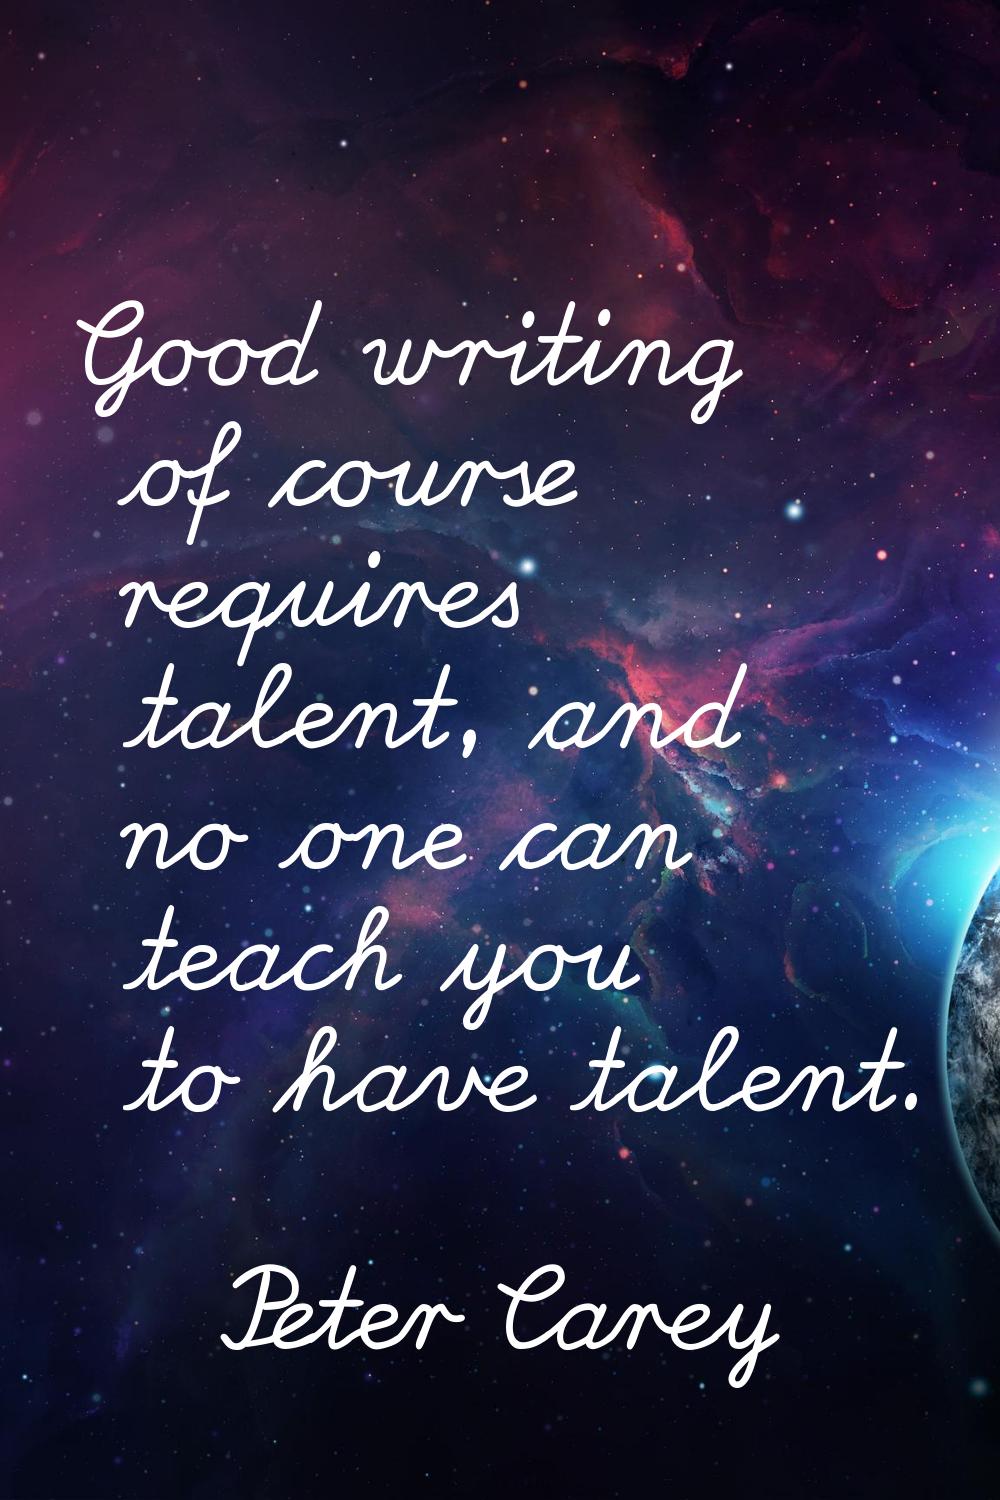 Good writing of course requires talent, and no one can teach you to have talent.